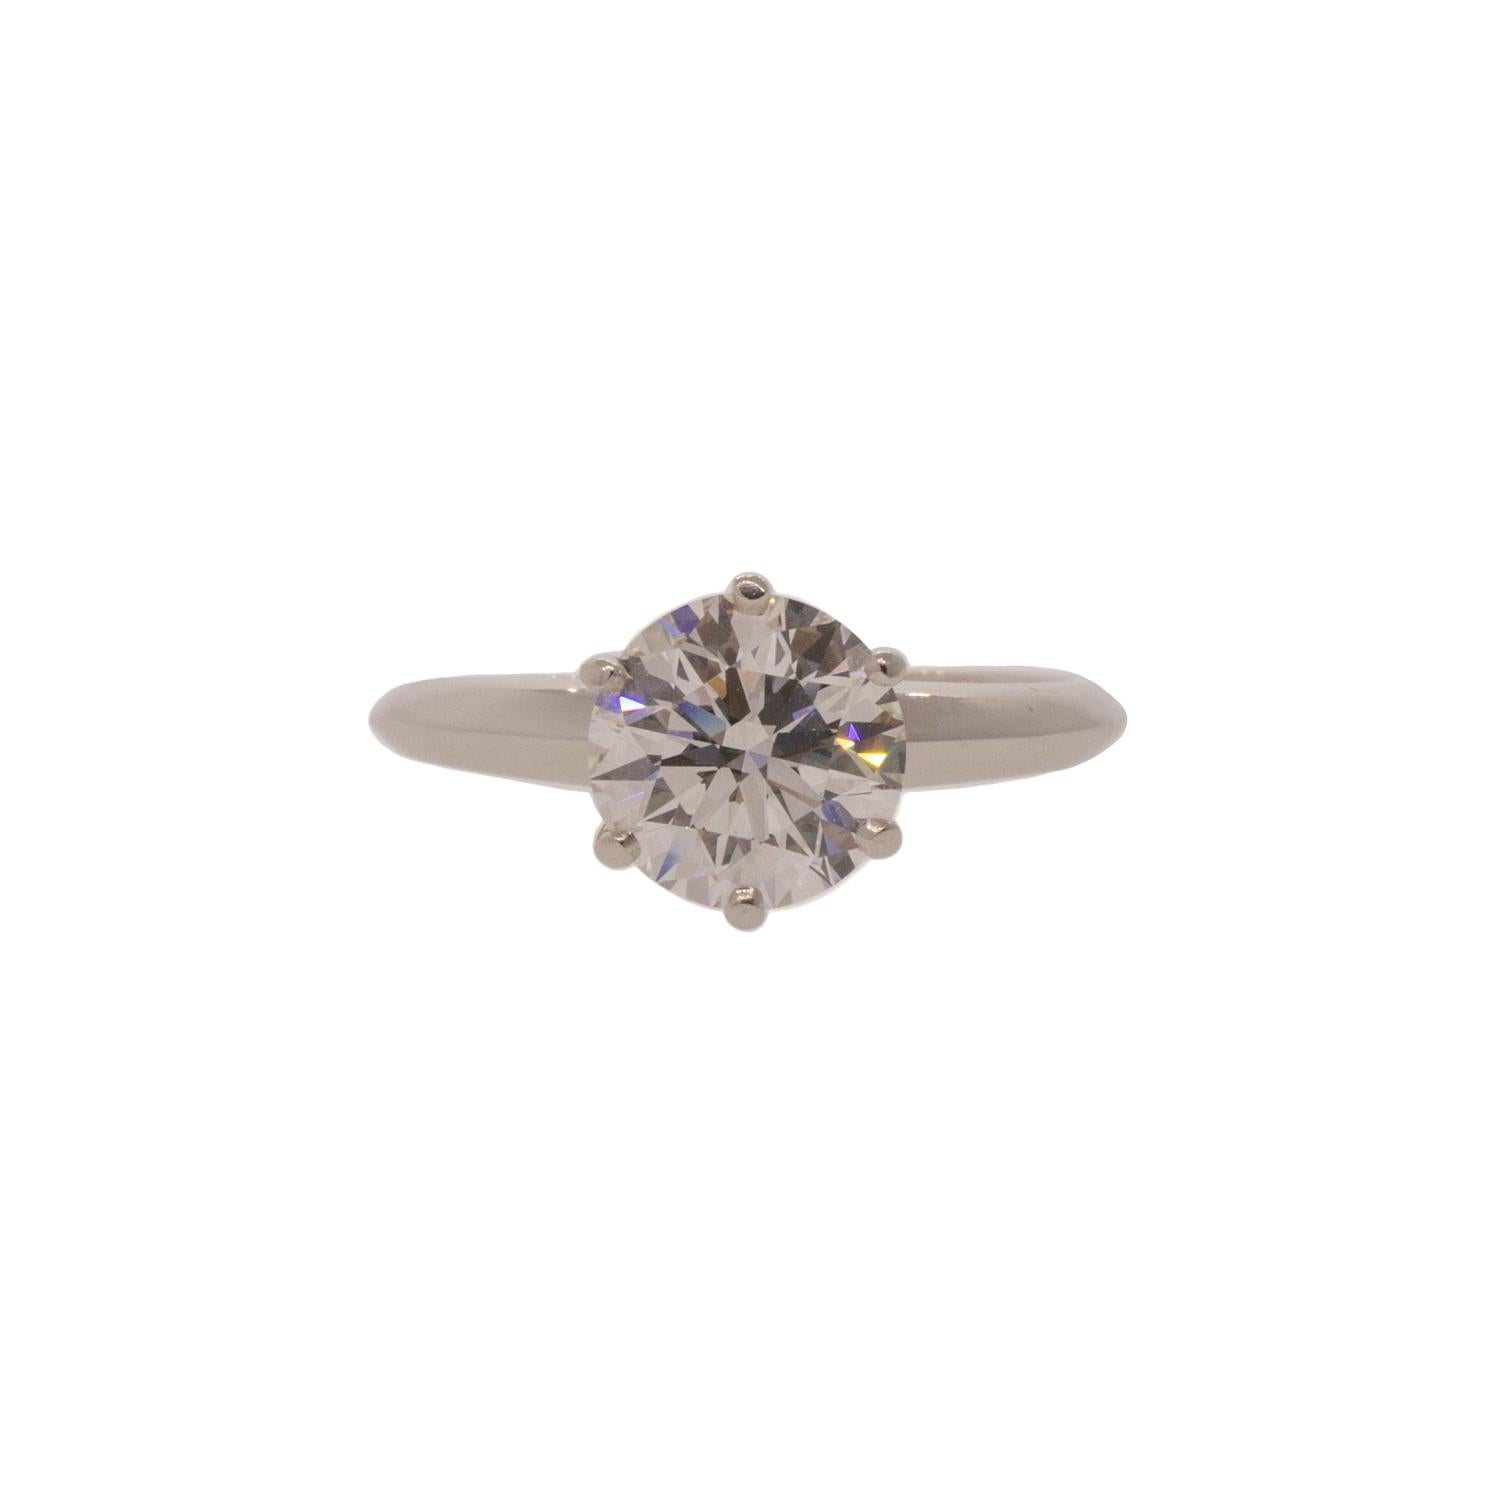 A truly timeless classic. This estate piece exemplifies the craftsmanship of Tiffany & Co. The centerpiece is a Triple-X round brilliant cut 1.64ct diamond with G/VVS1 color and clarity. A Triple-X refers to a diamond that has an excellent cut,